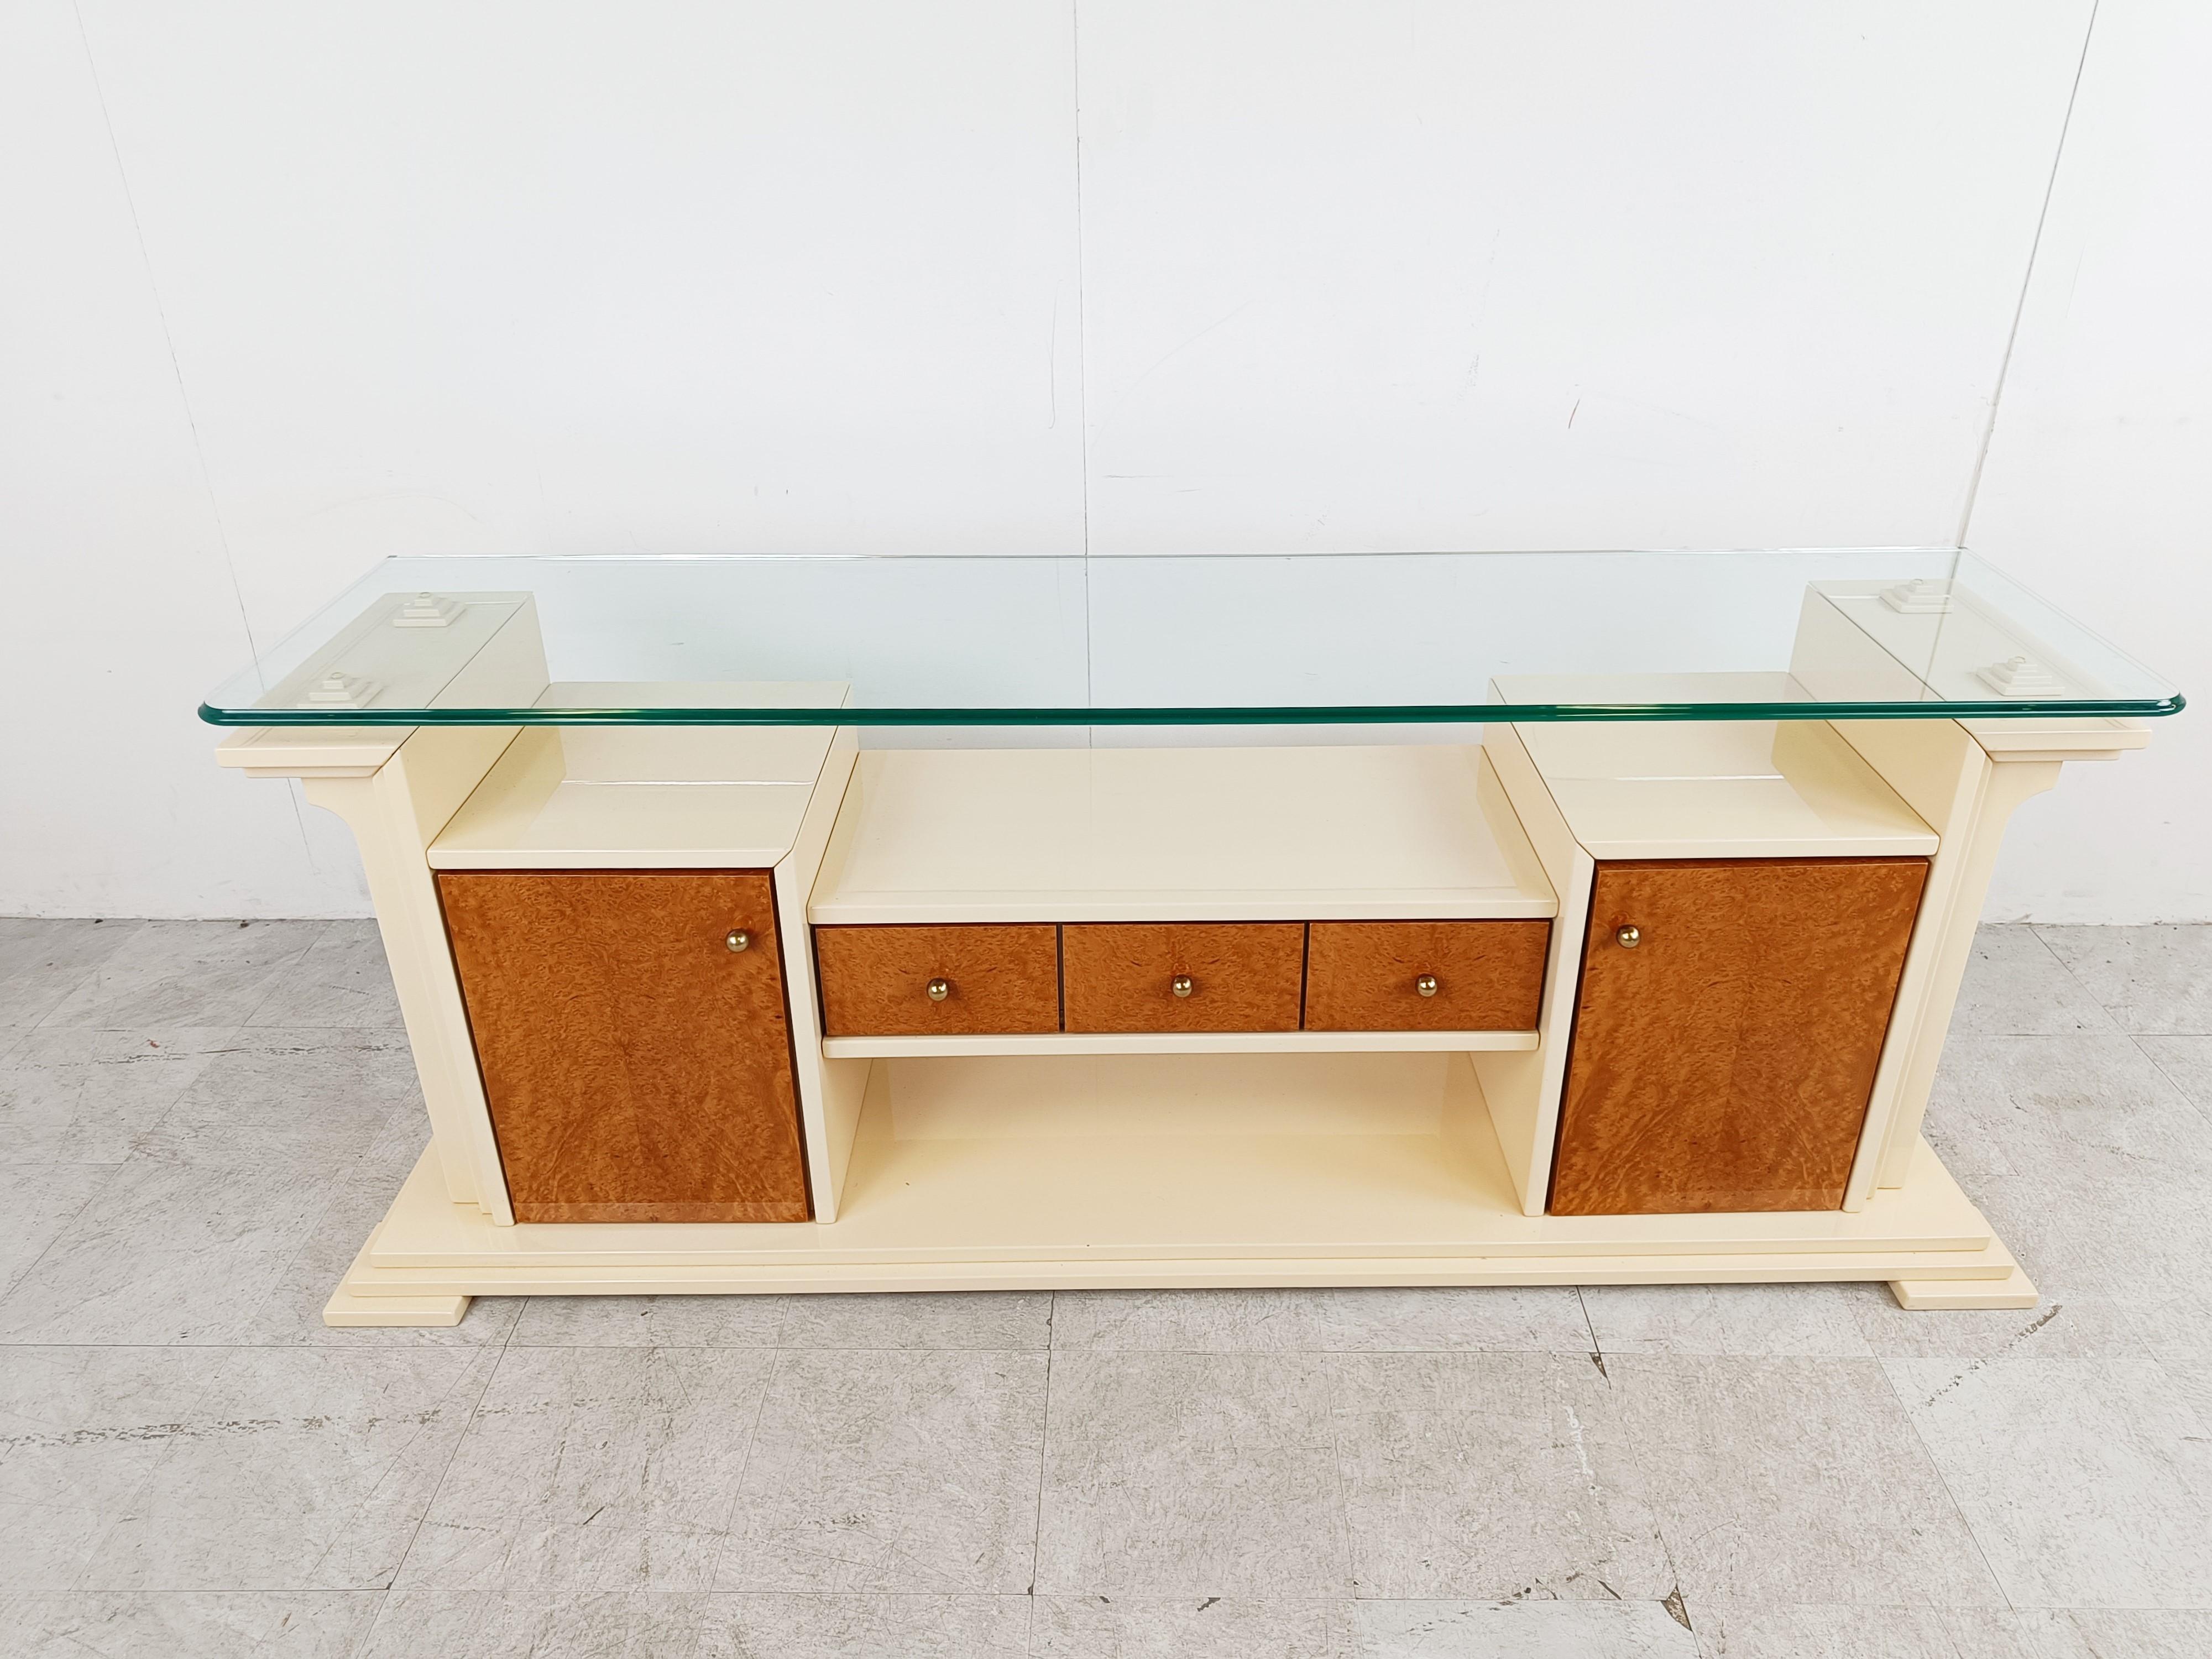 Luxurious 1980s sideboard made from beige lacquered wood with burl wood doors and drawers and brass handles. 

The sideboard has a glass top.

Striking architectural design.

1980s - France

Dimensions:
Lenght: 195cm/76.77